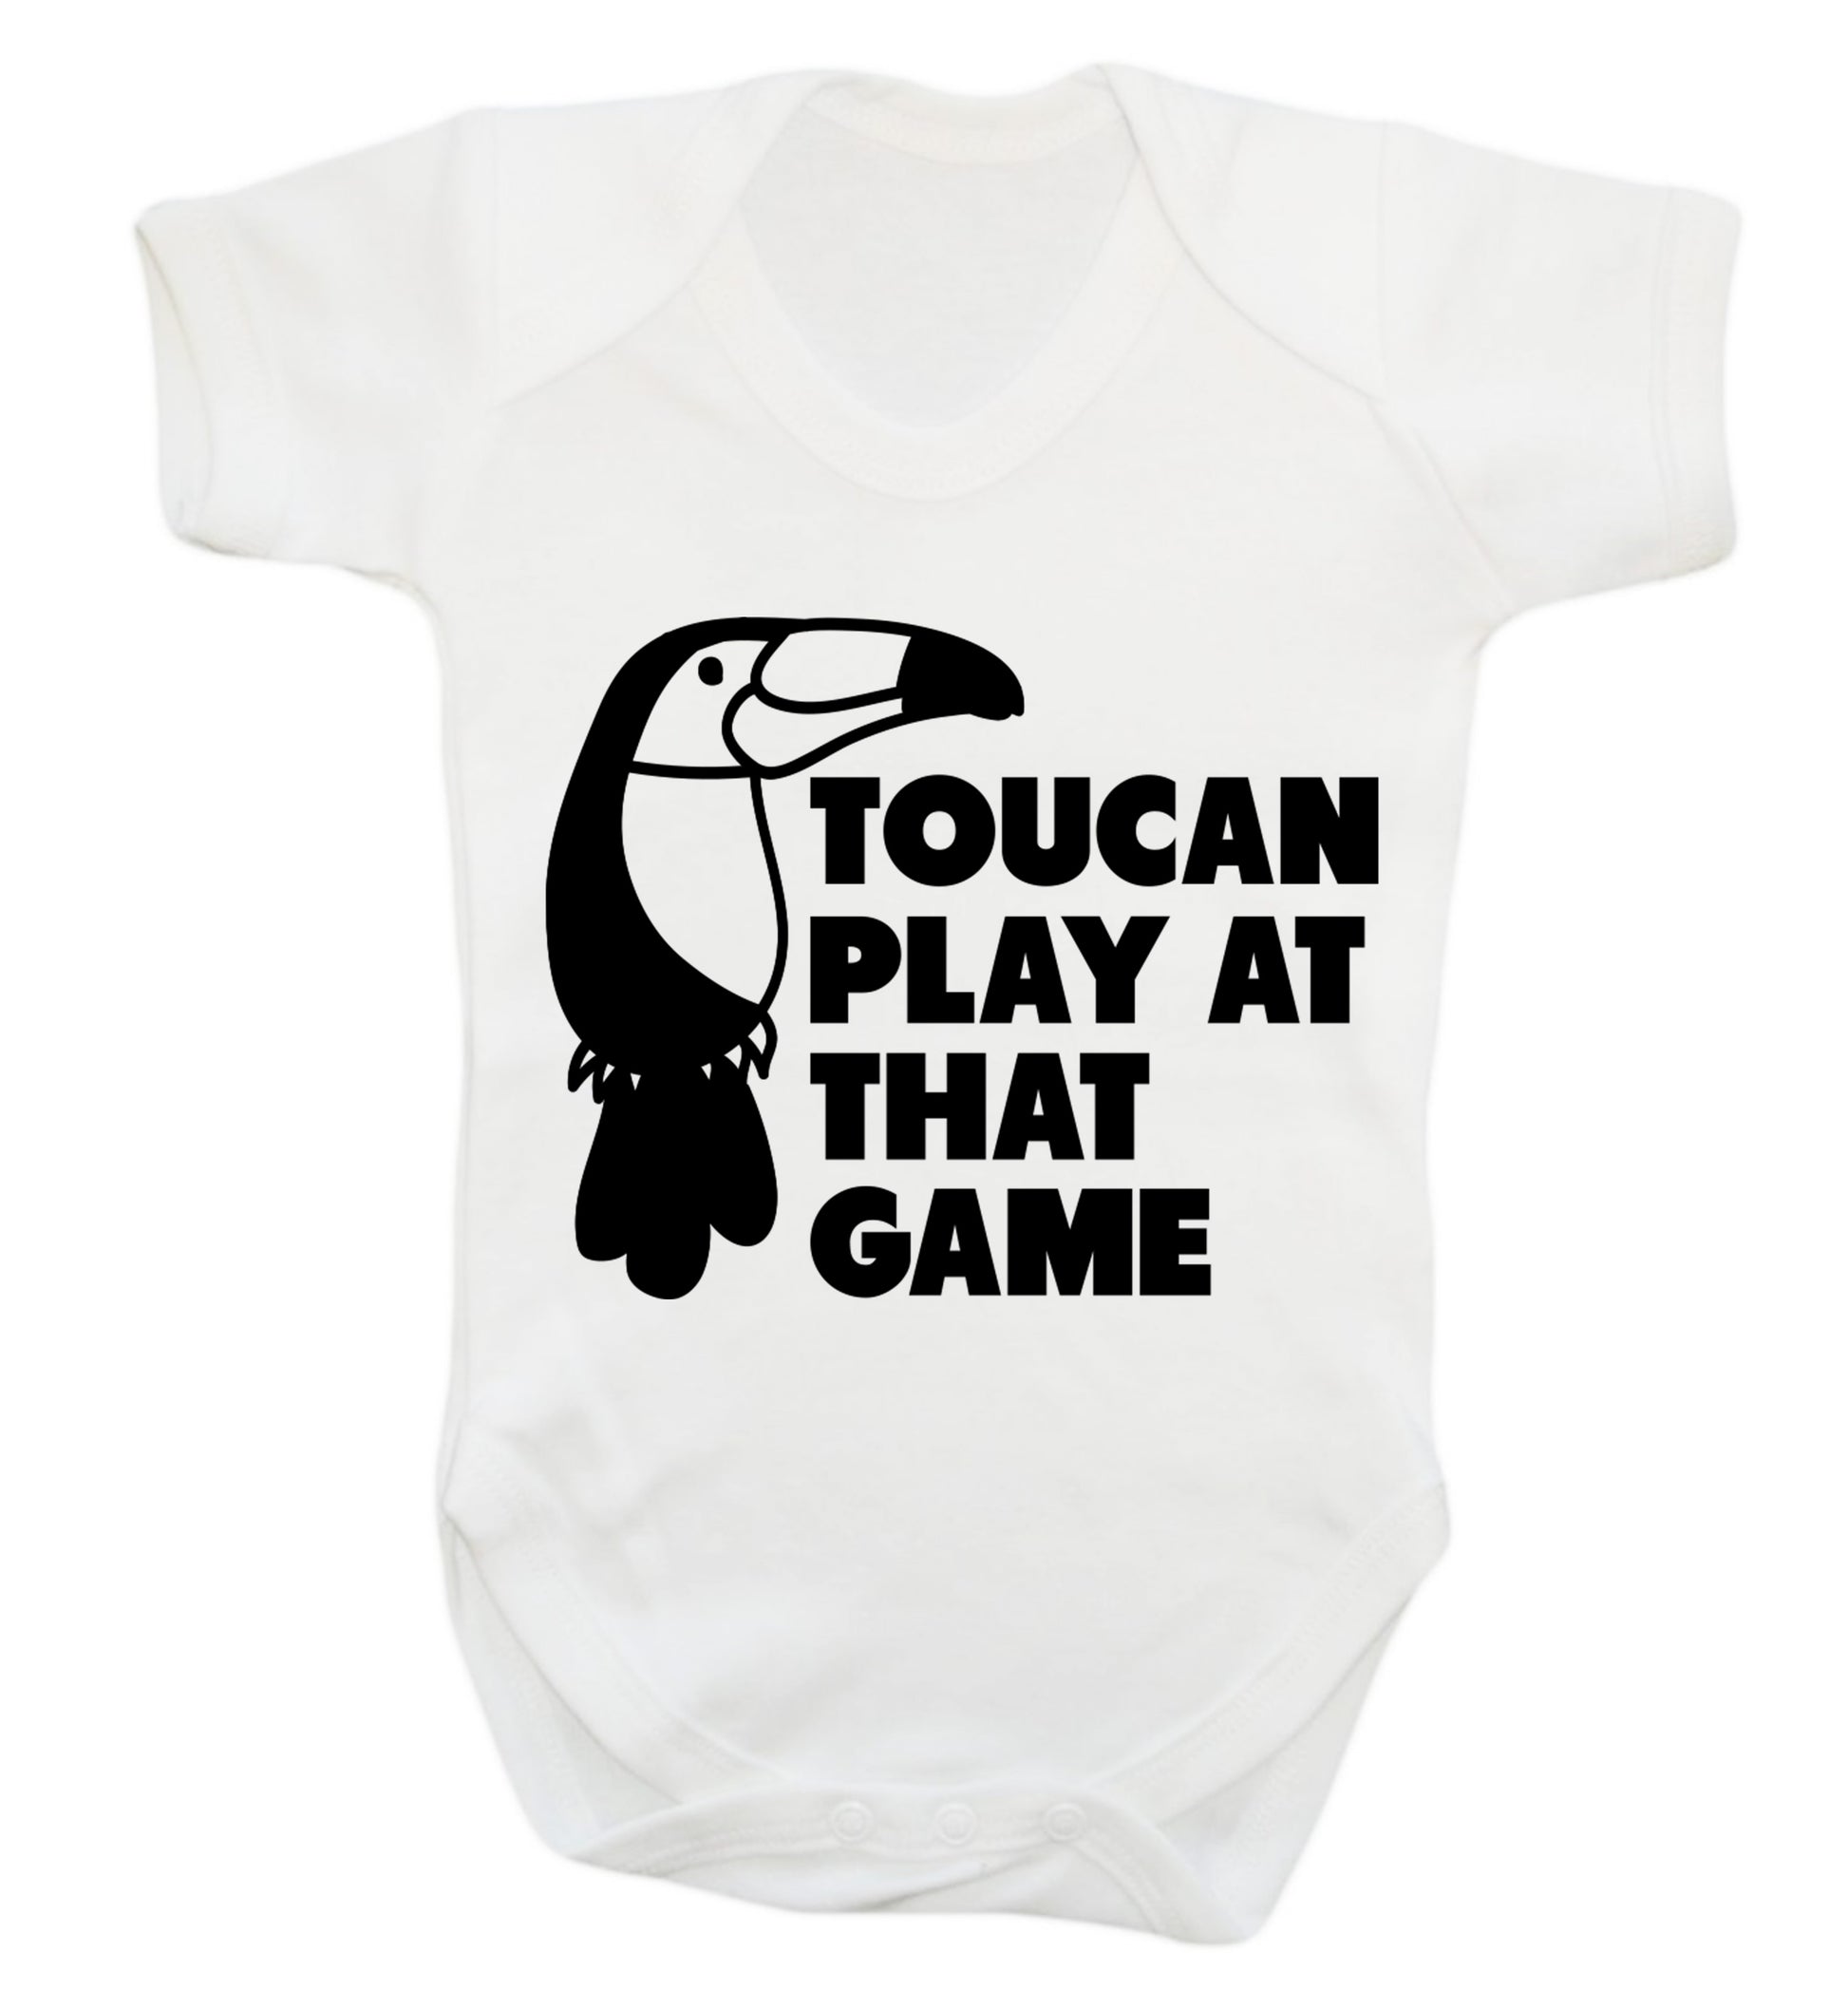 Toucan play at that game Baby Vest white 18-24 months